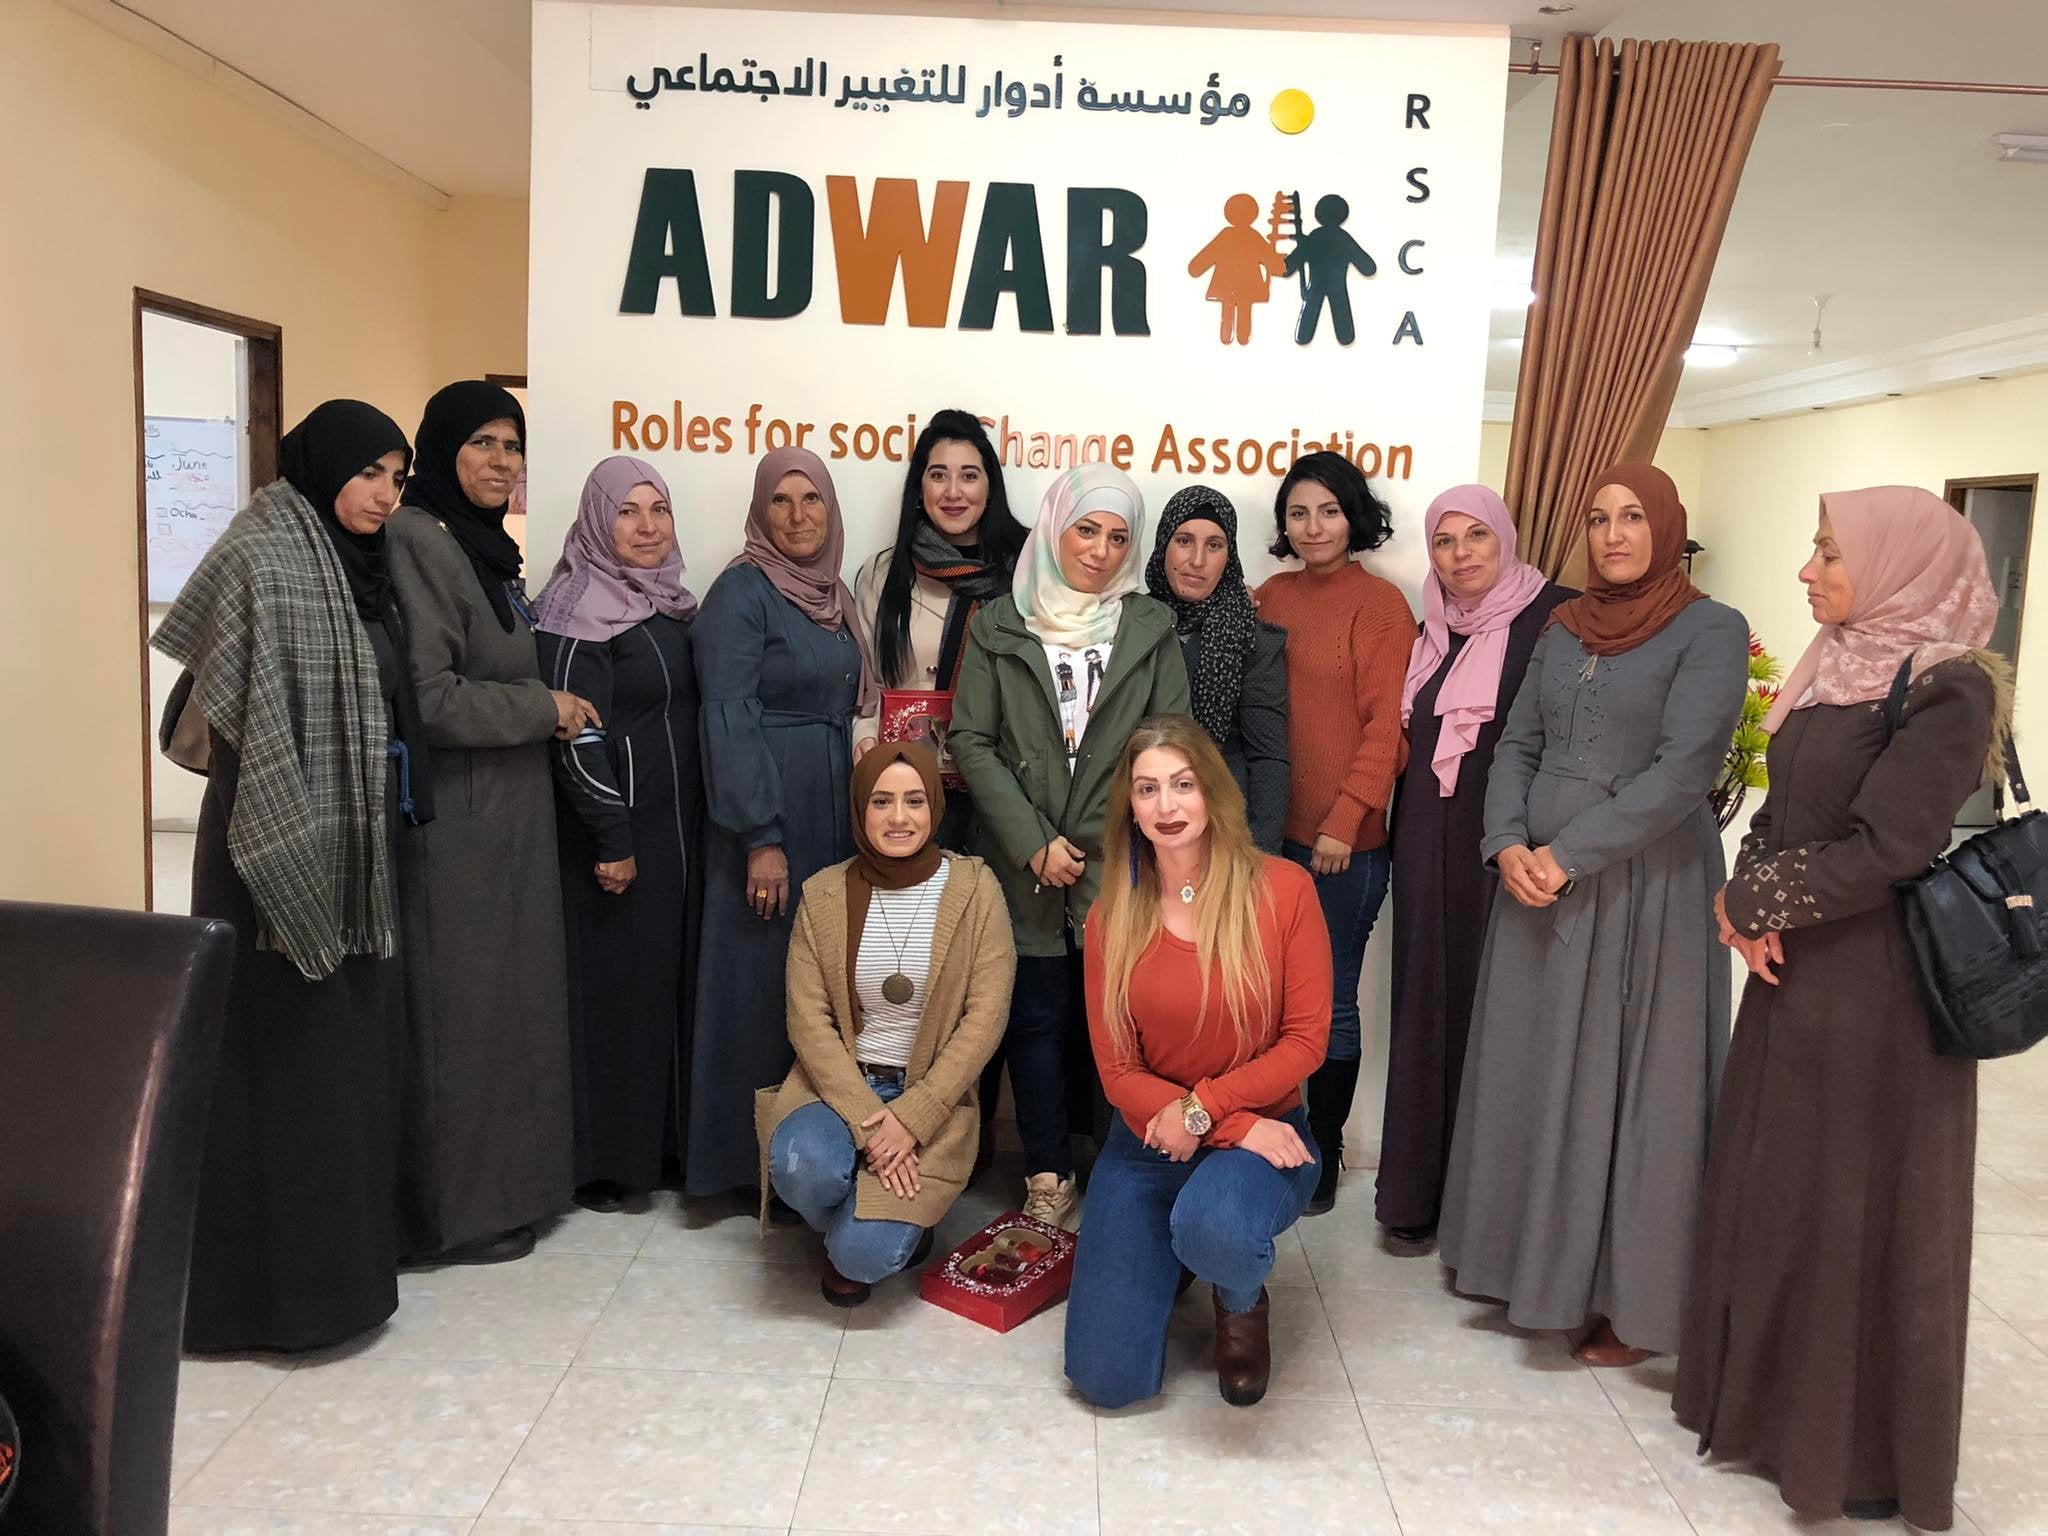  Women Protection Committee in Masafer Bani Naim honors ADWAR Association